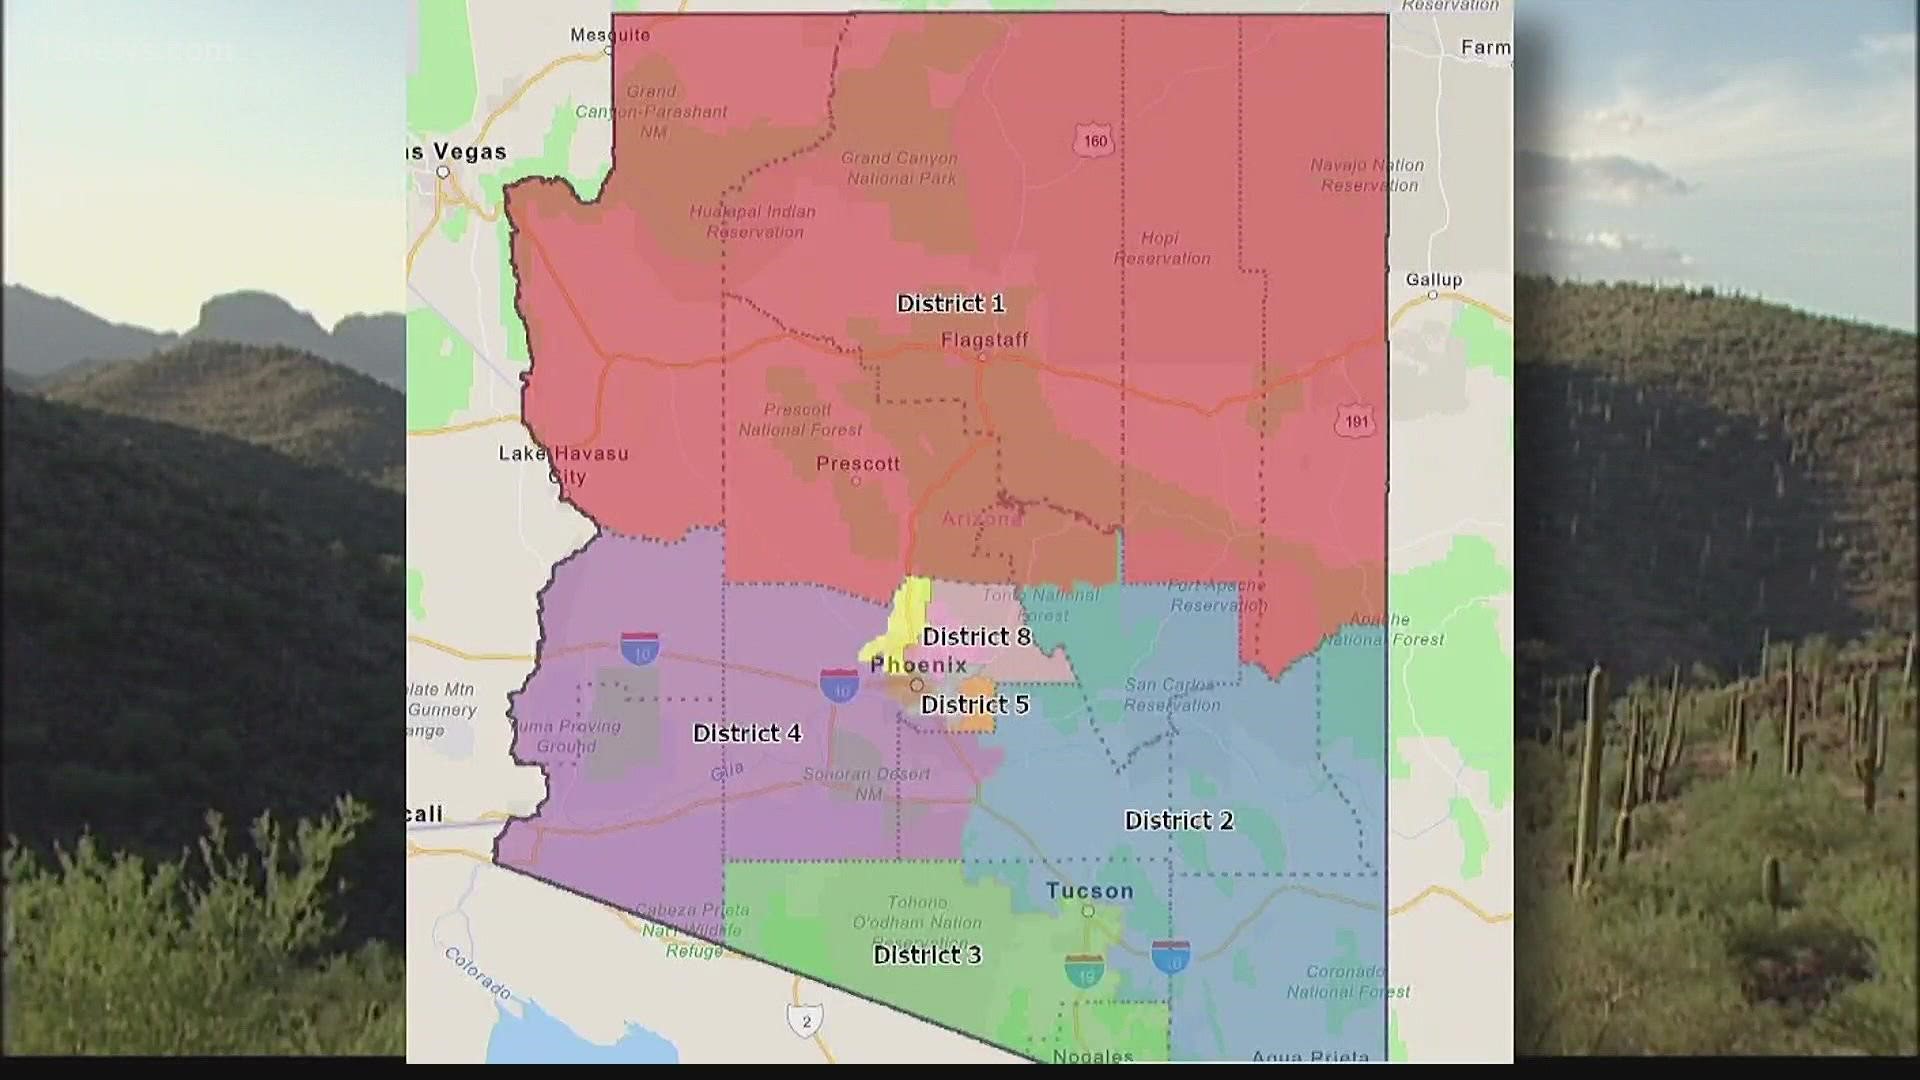 The bipartisan Arizona Independent Redistricting Commission has redrawn the state's congressional and legislative districts for the next 10 years.